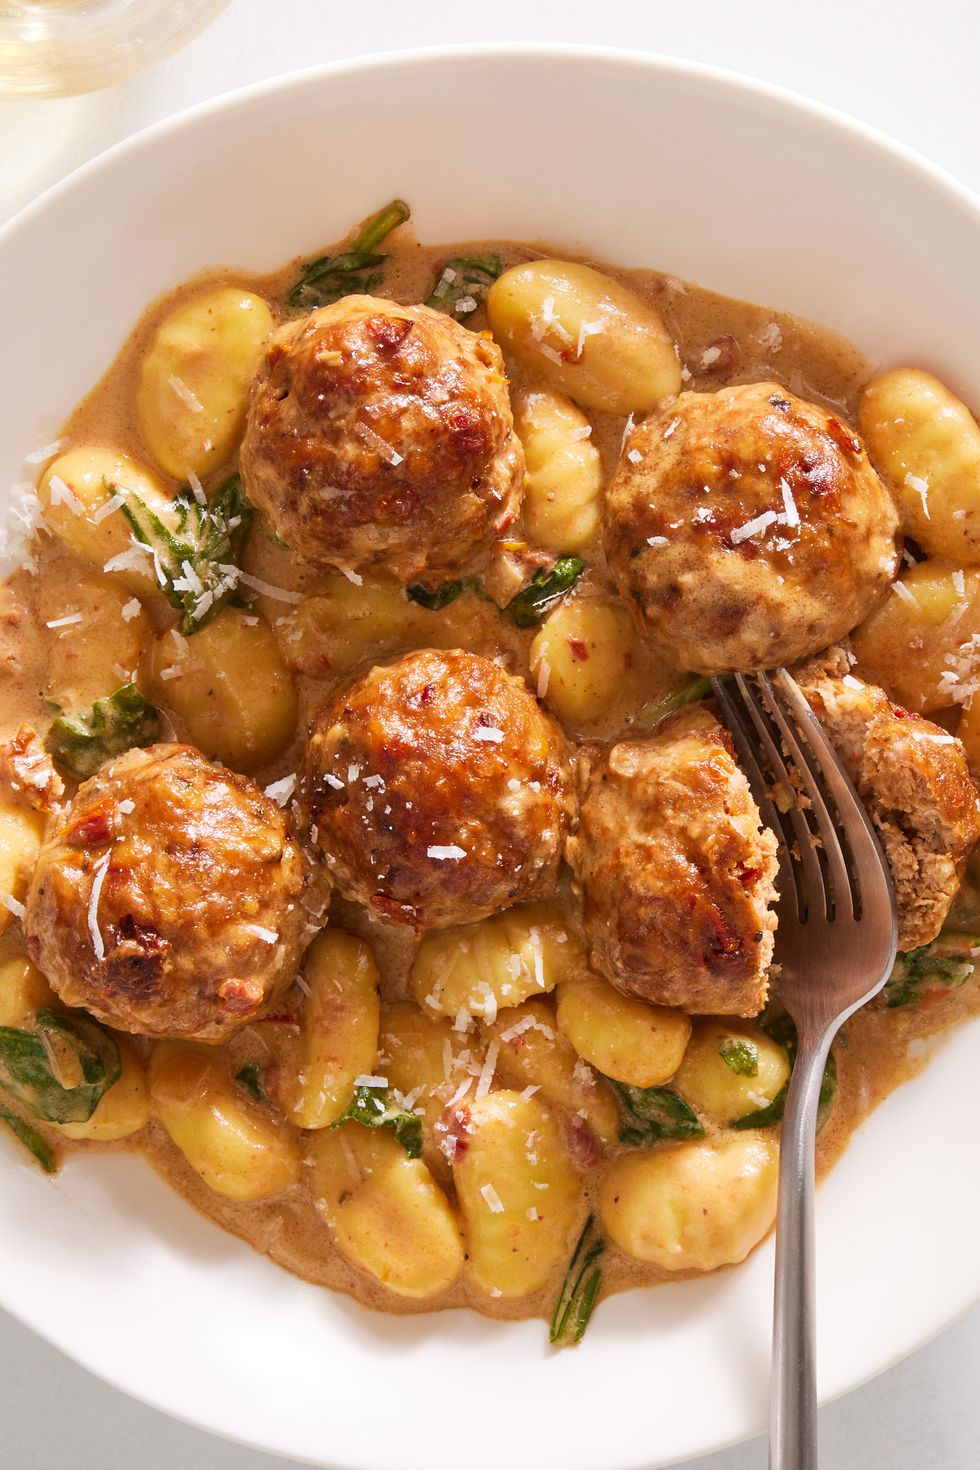 https://hips.hearstapps.com/hmg-prod/images/slow-cooker-tuscan-chicken-meatballs-with-gnocchi-secondary-64665b26ed479.jpg?crop=0.6666666666666666xw:1xh;center,top&resize=980:*